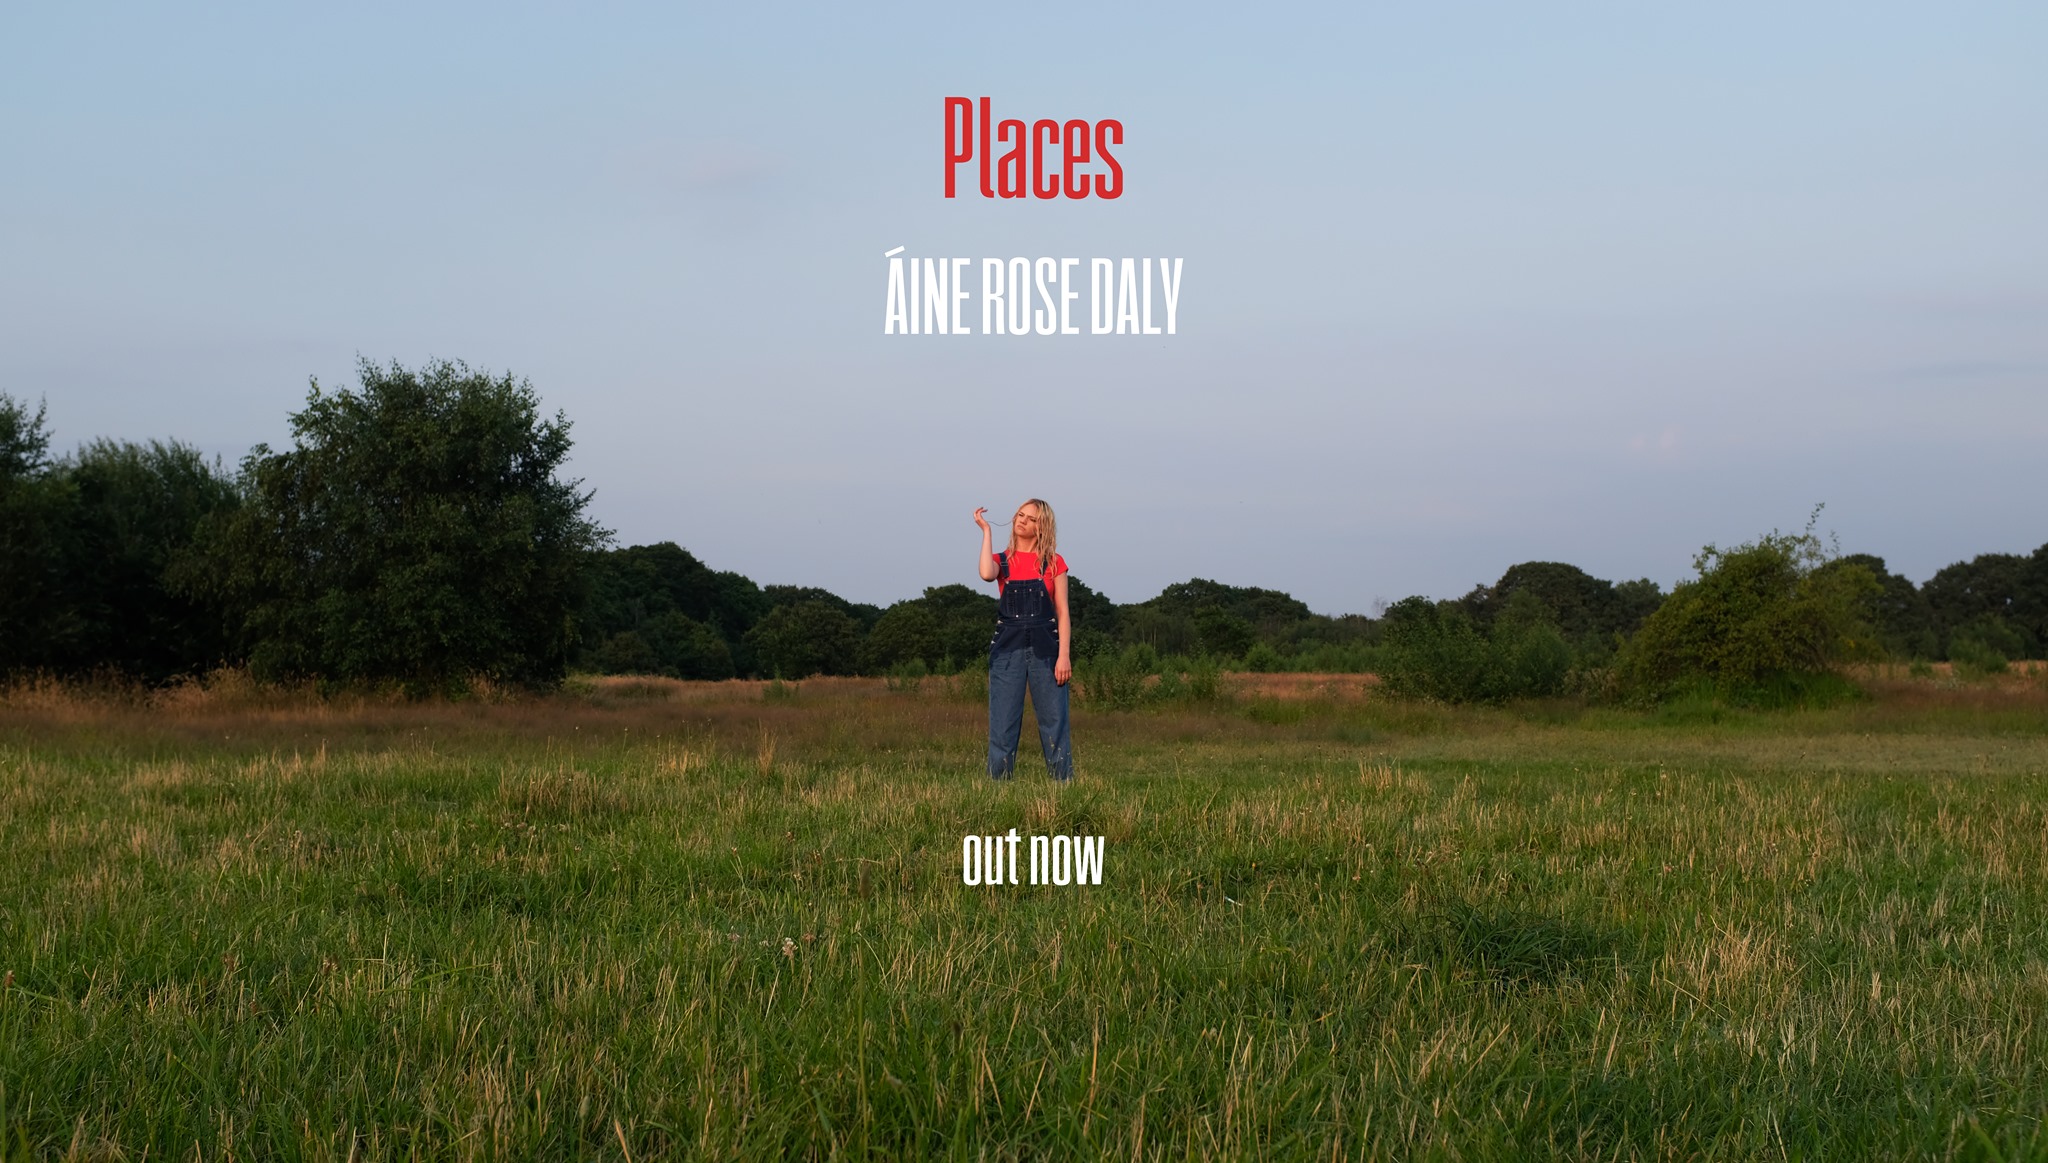 places - aine rose daly - uk - indie - indie music - indie pop - new music - music blog - wolf in a suit - wolfinasuit - wolf in a suit blog - wolf in a suit music blog